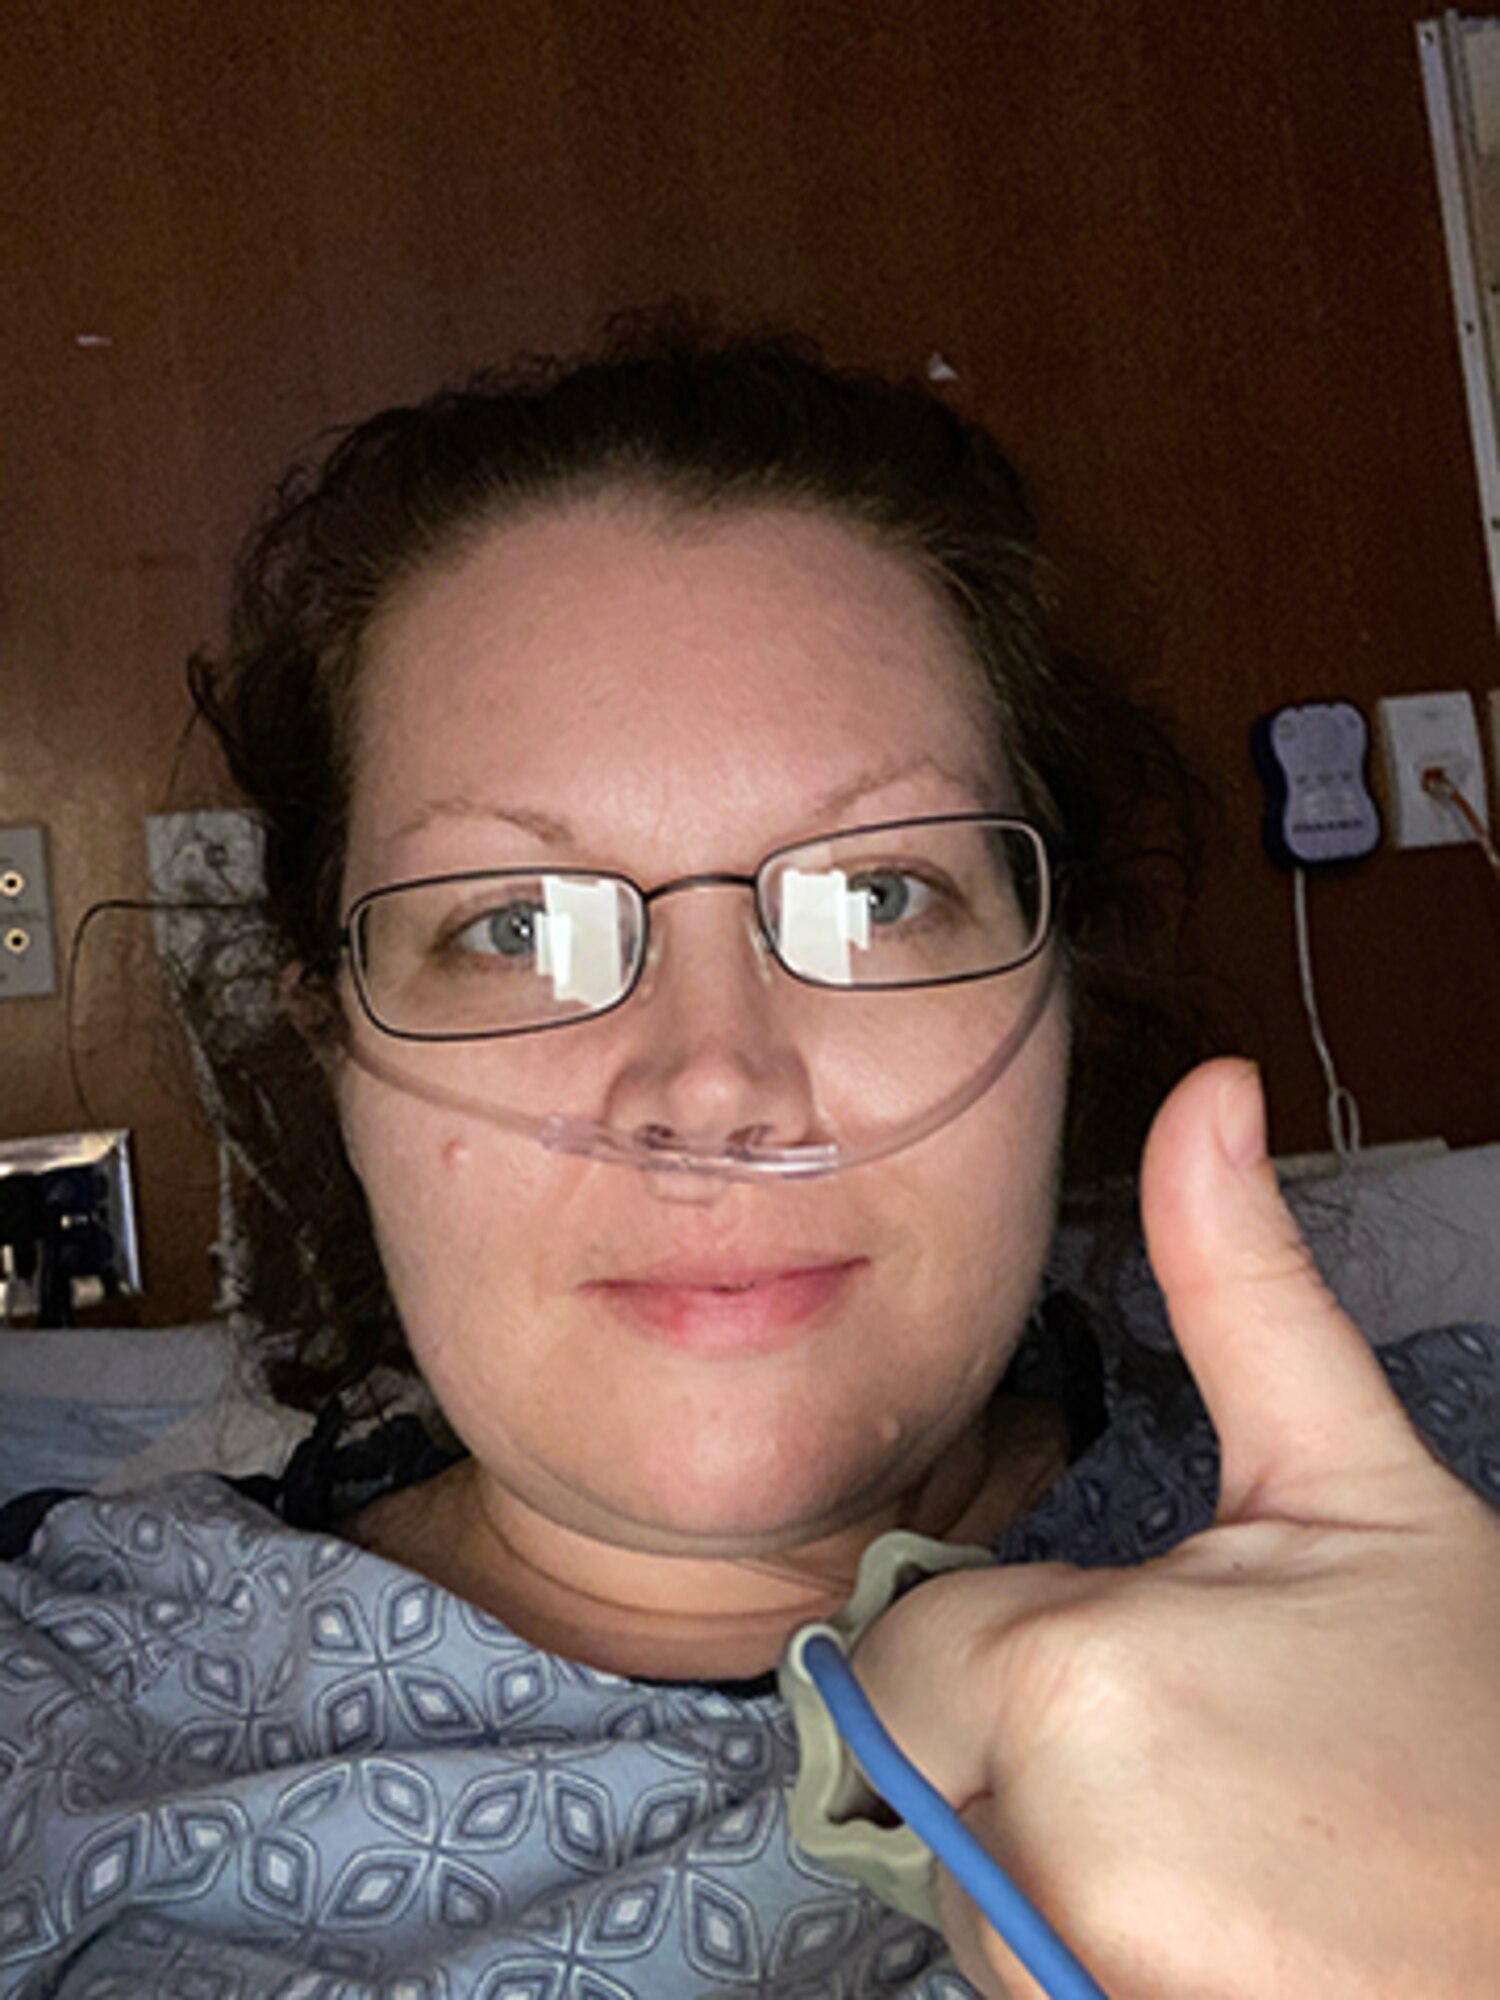 Capt. Danielle Sease, a Global Network Systems Branch budget analyst at Hanscom Air Force Base, Mass., gives a thumbs up while hospitalized with COVID-19, March 31. Sease was diagnosed with the novel Coronavirus and double pneumonia after battling symptoms for nearly a week and is now recovering. (Courtesy photo)